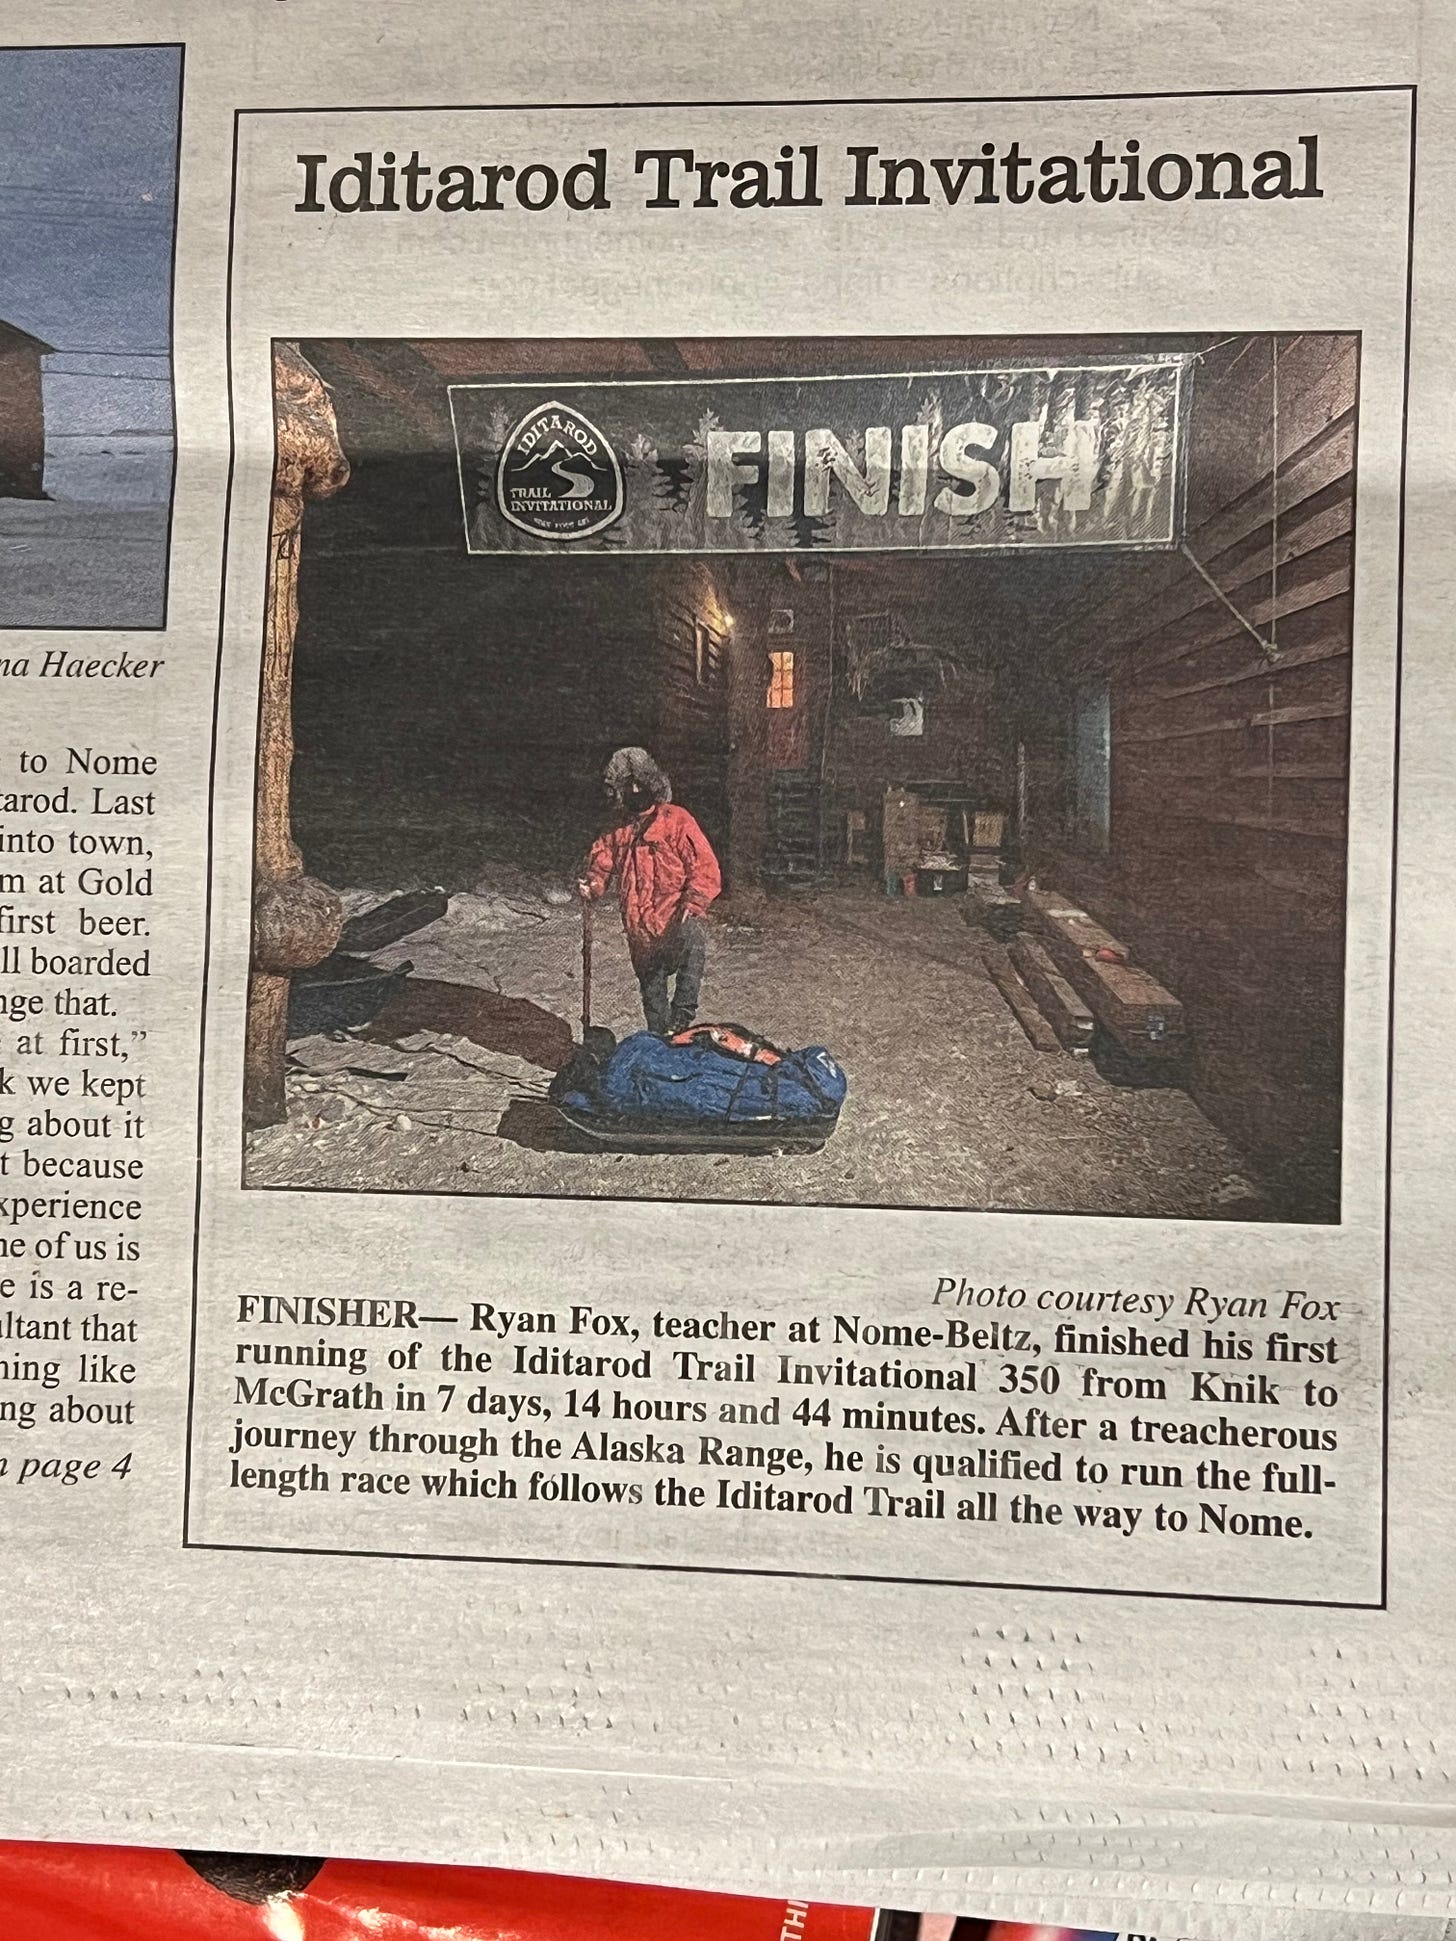 Image of a newspaper clipping featuring a teacher who walked to McGrath as part of the Iditarod Trail Invitational